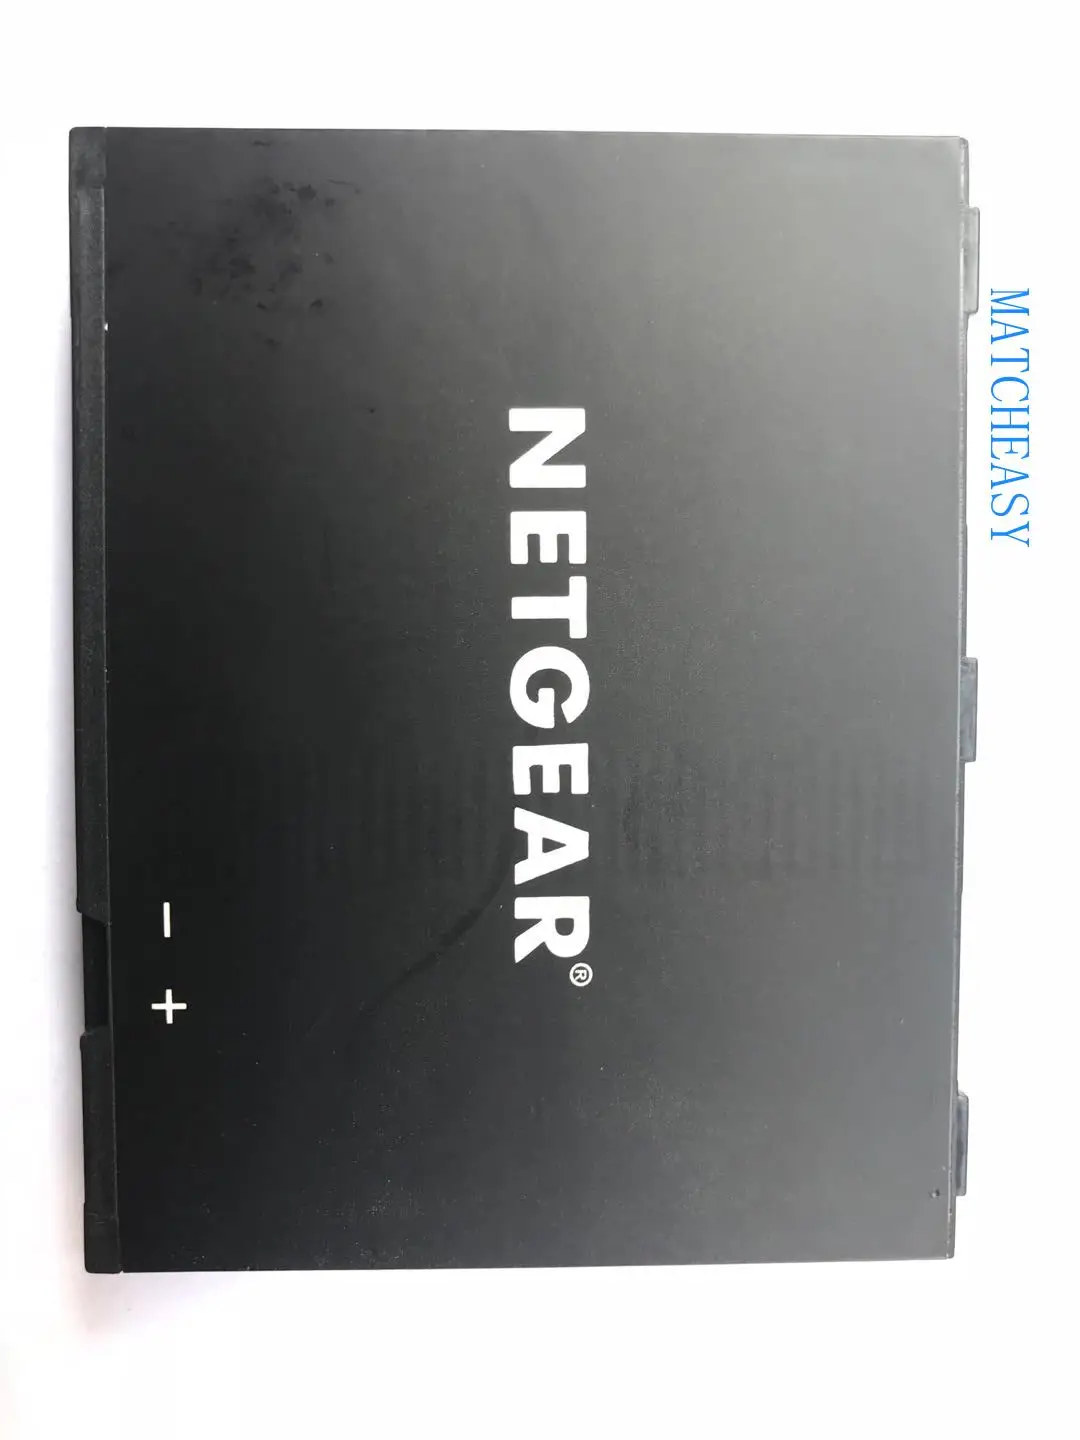 

NEW 5040mAh/19.76Wh 3.8V W10 W-10 Replacement Battery For NETGEAR NightHawk M1 MR1100 battery